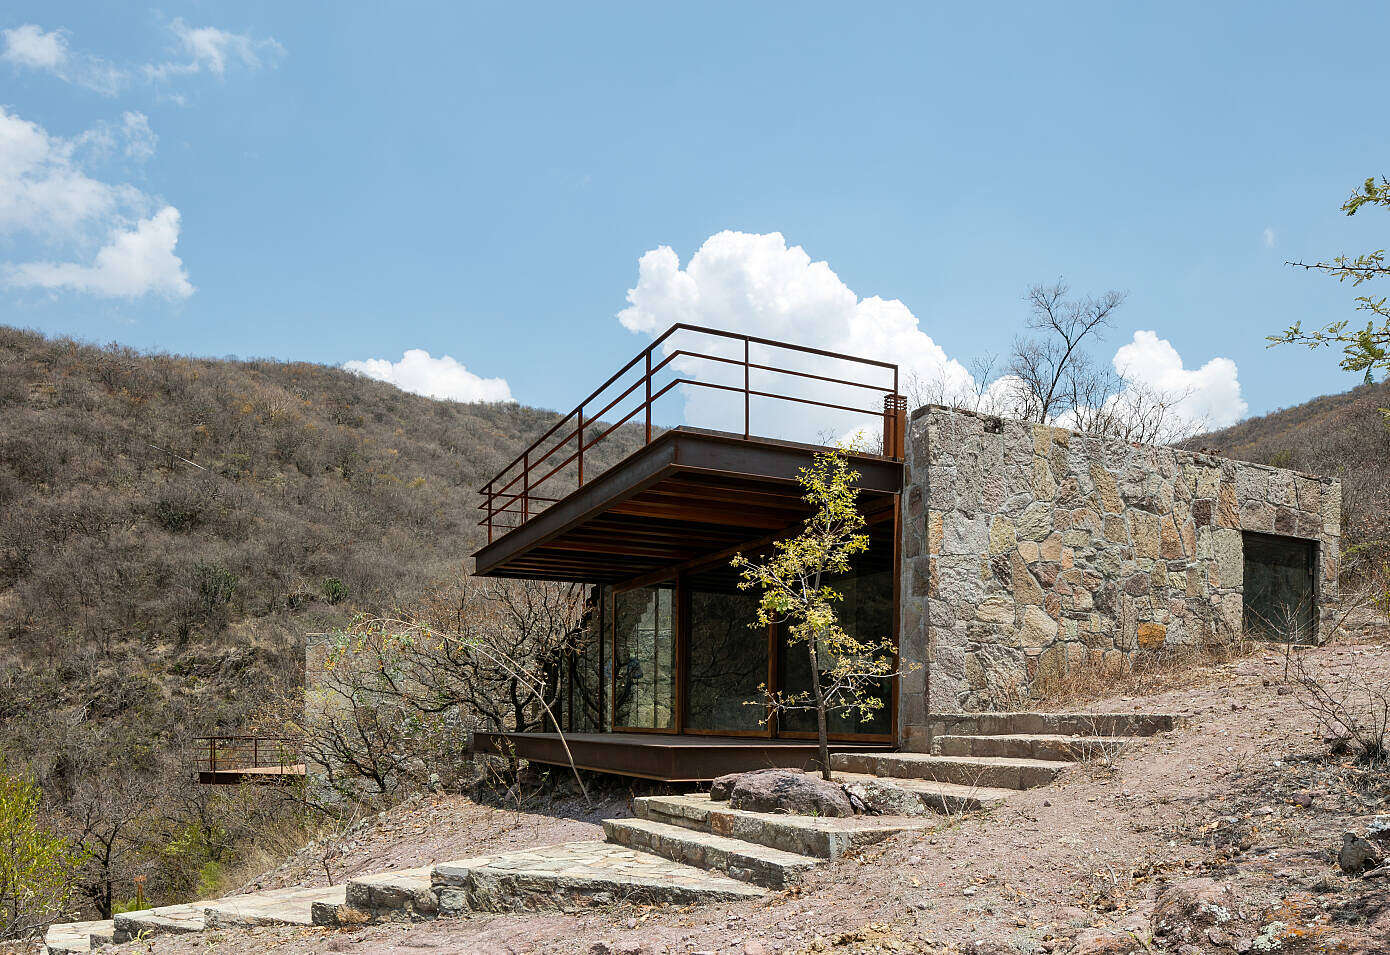 Teitipac Cabin by Lamz Arquitectura